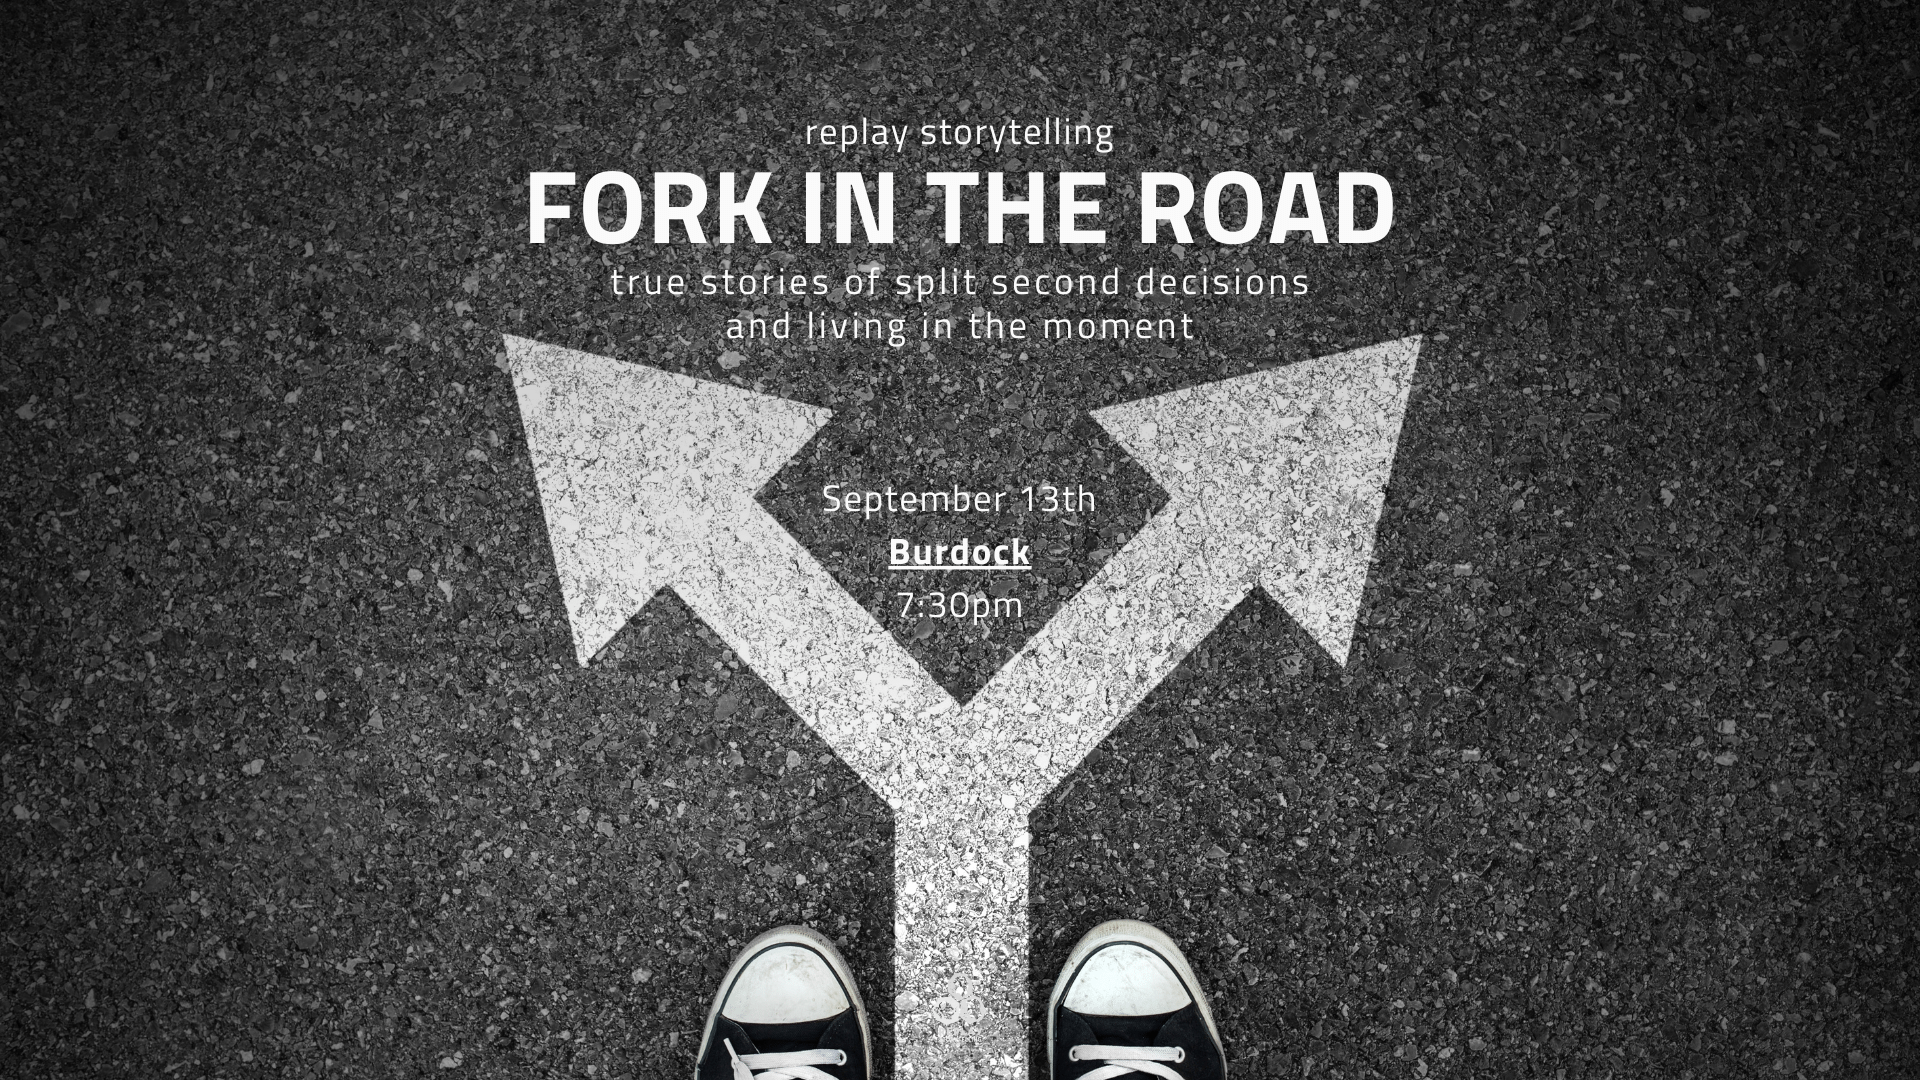 Poster image for Replay Storytelling's Fork in the Road.